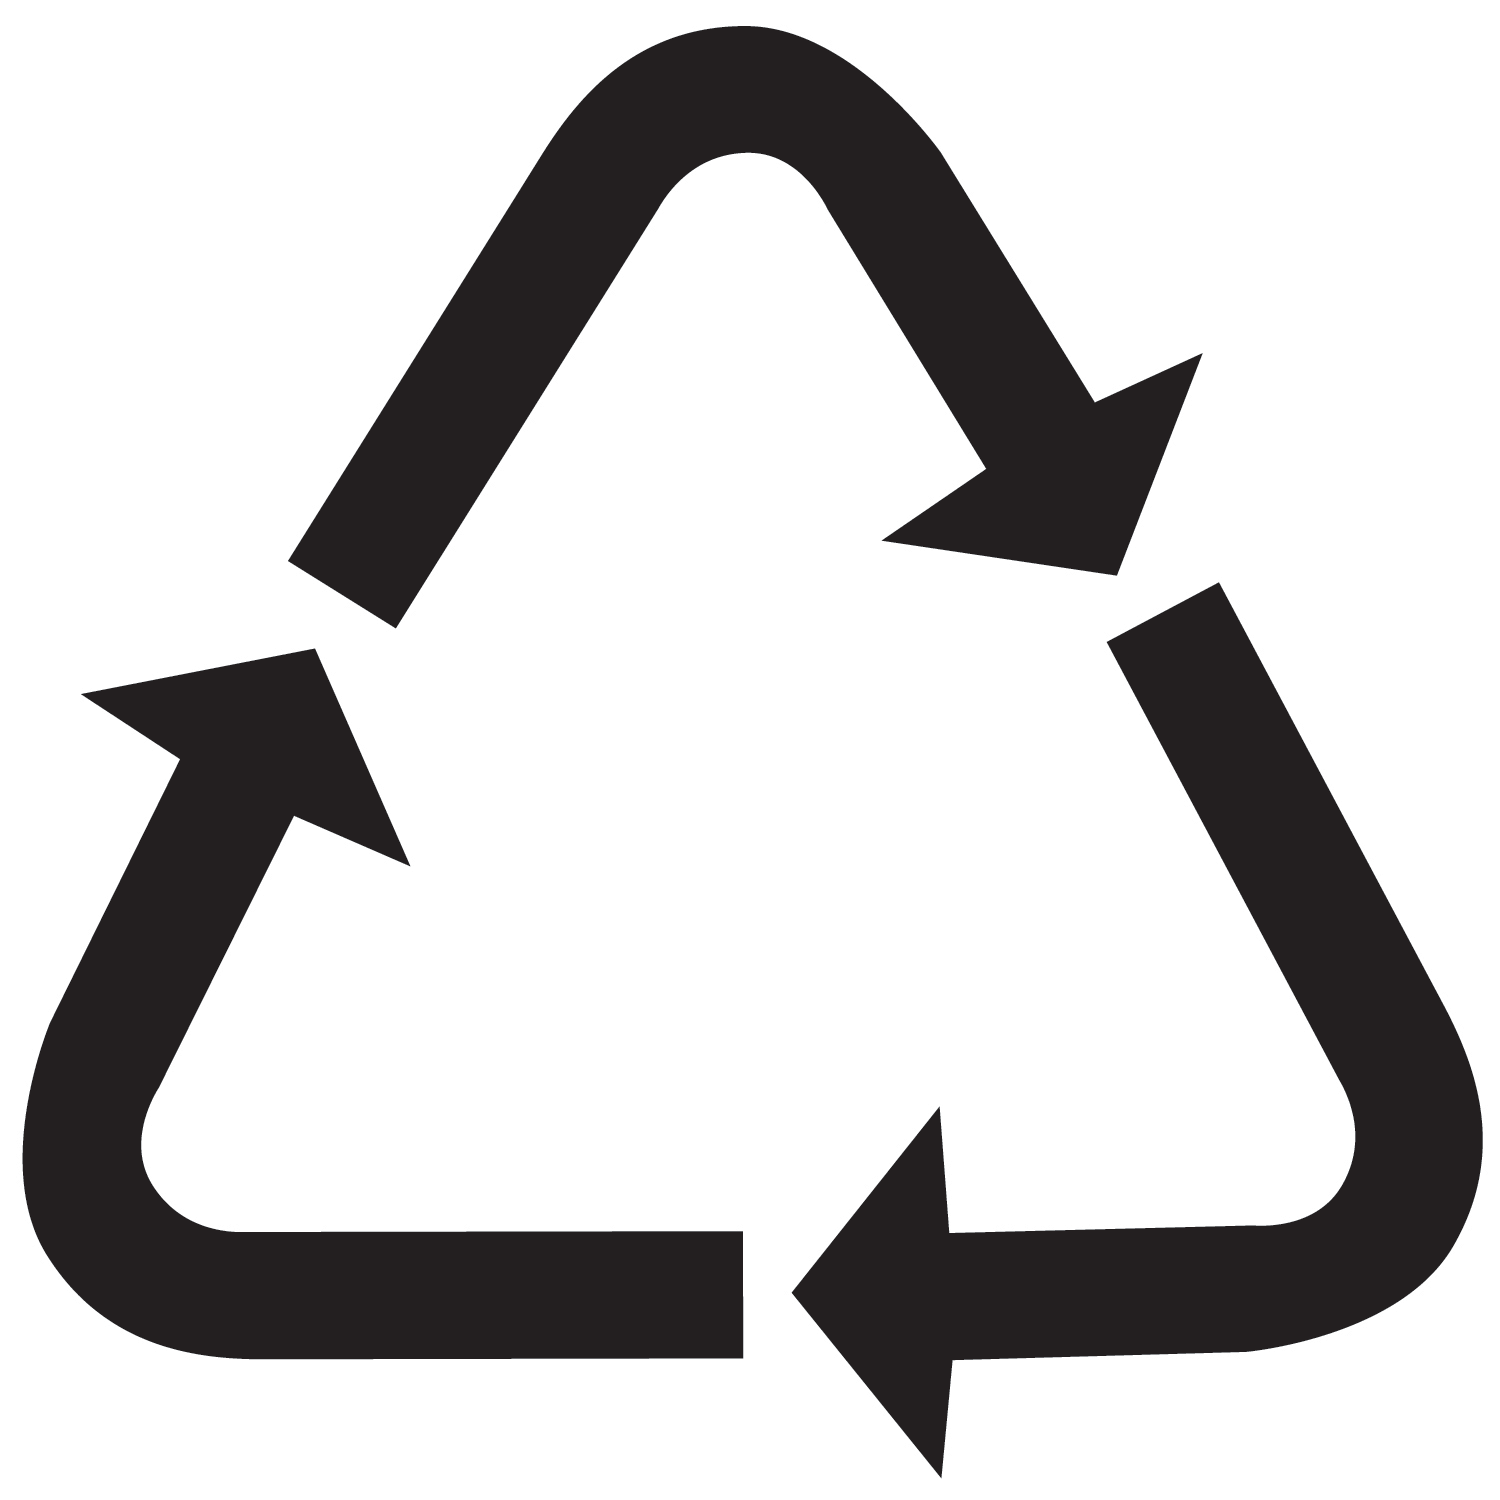 10 Different Styles of Recycling Symbol, Free to Download 